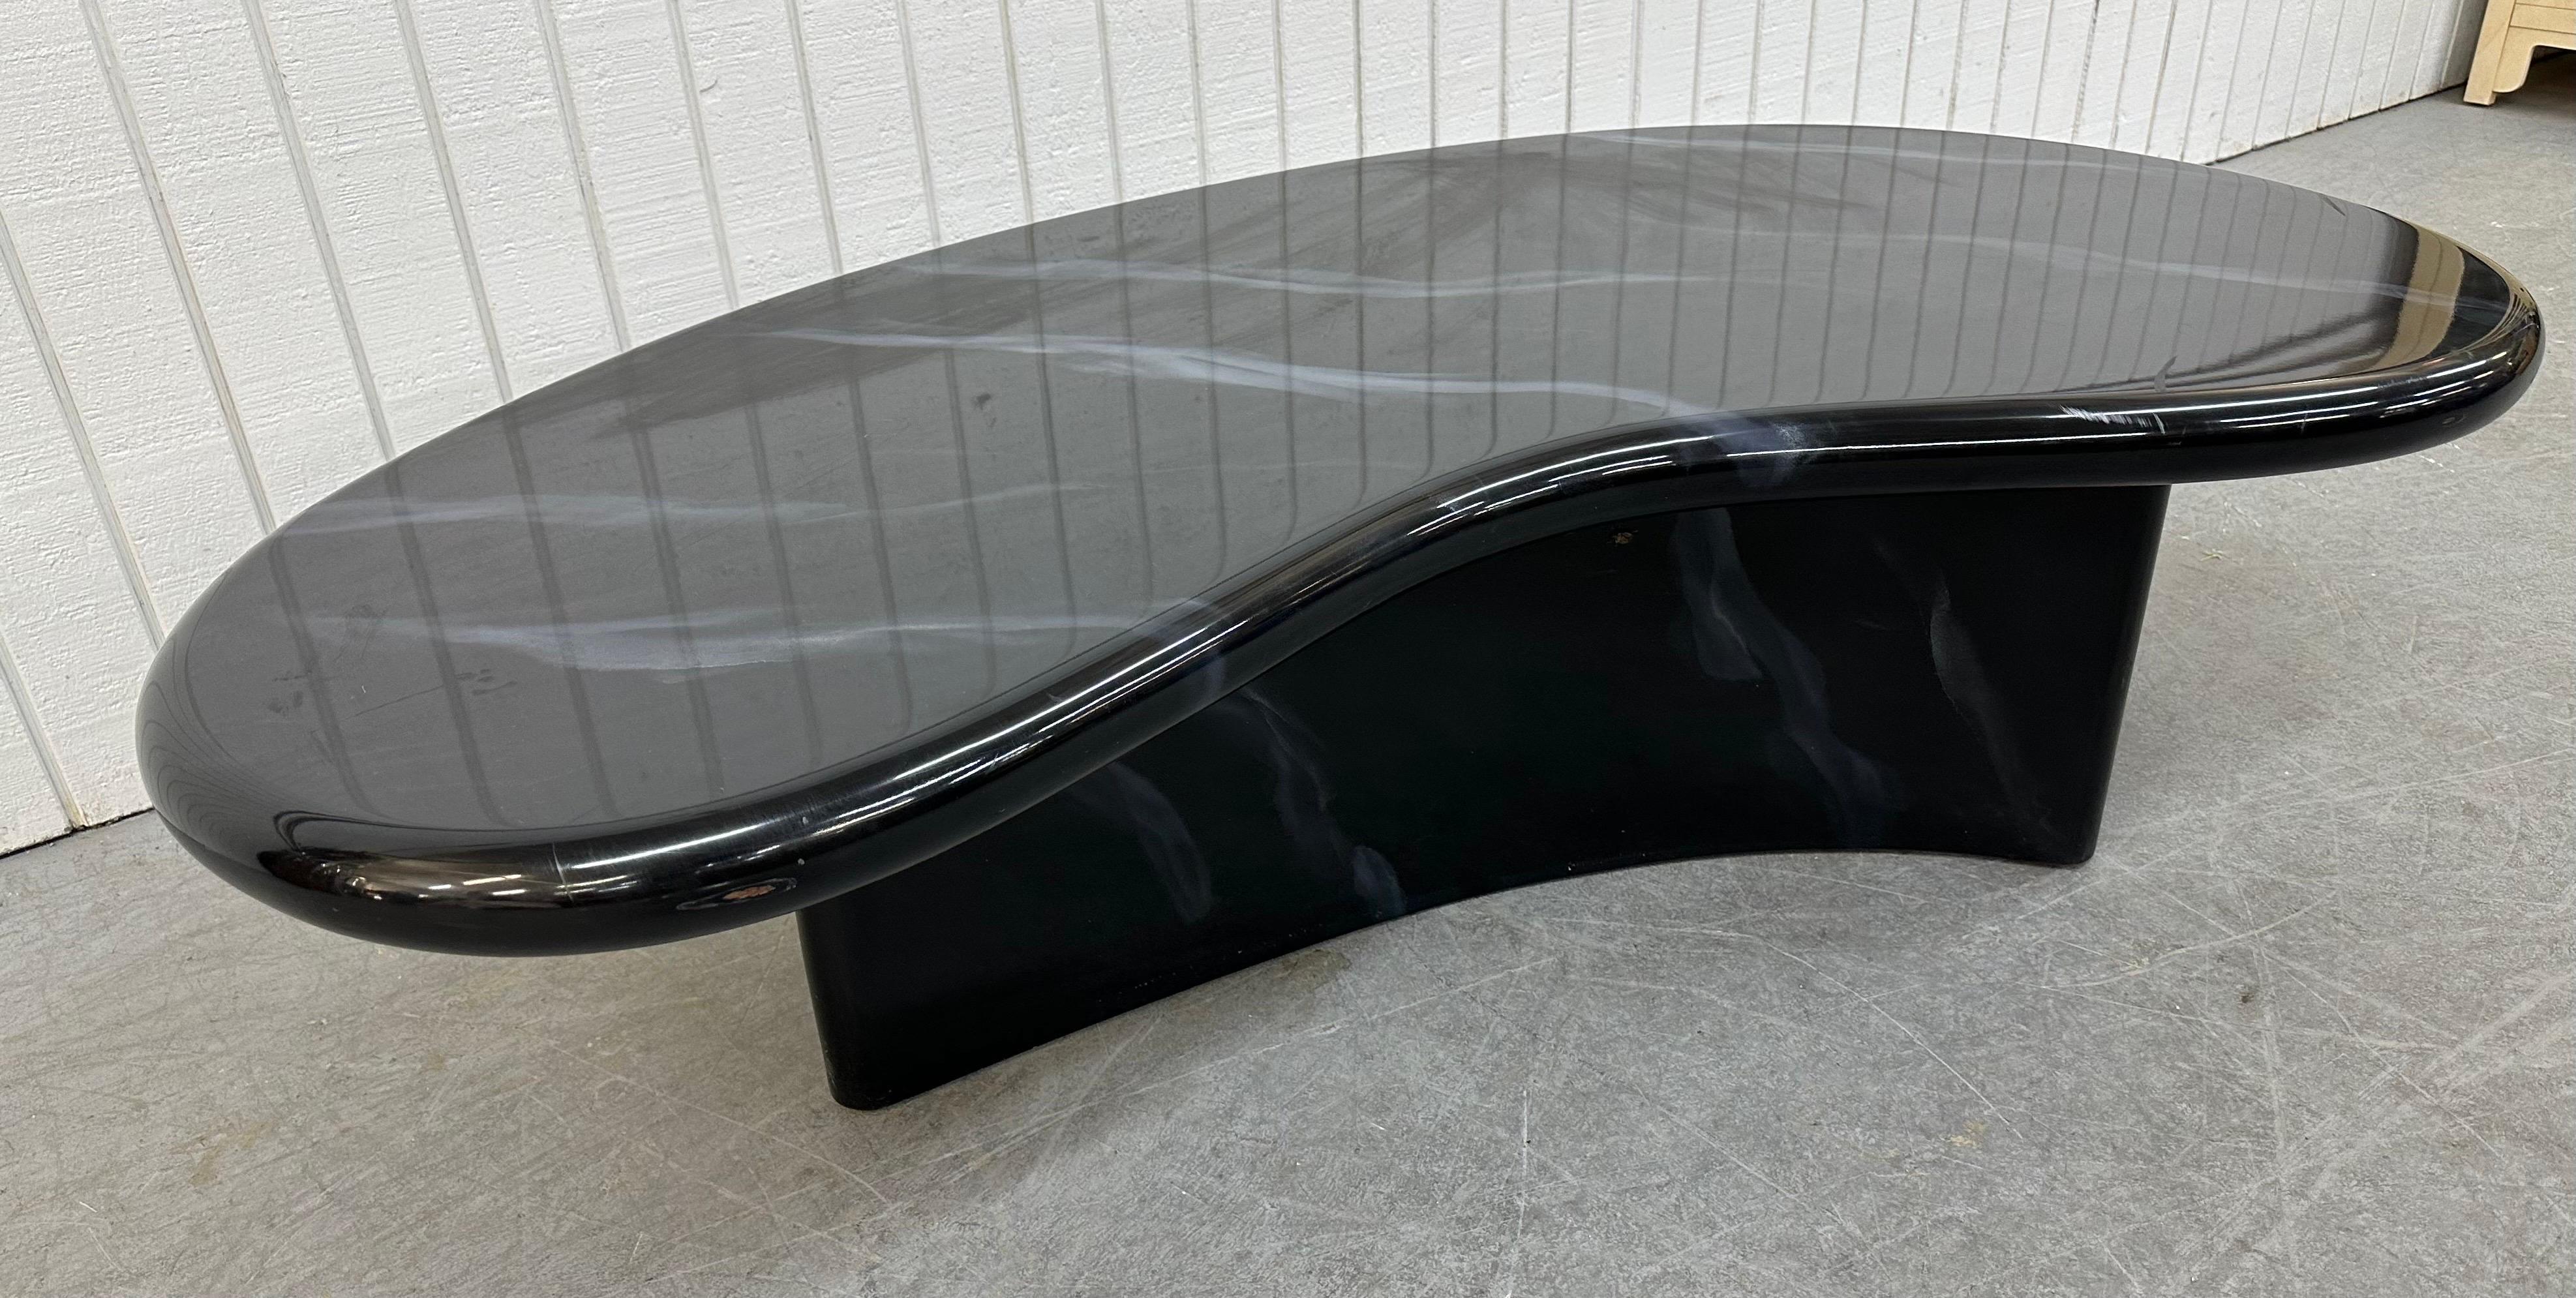 This listing is for a Post-Modern Black Lacquered Coffee Table. Featuring a kidney shaped design, pedestal base, and a beautiful black lacquered finish. This is an exceptional combination of quality and post modernism design!